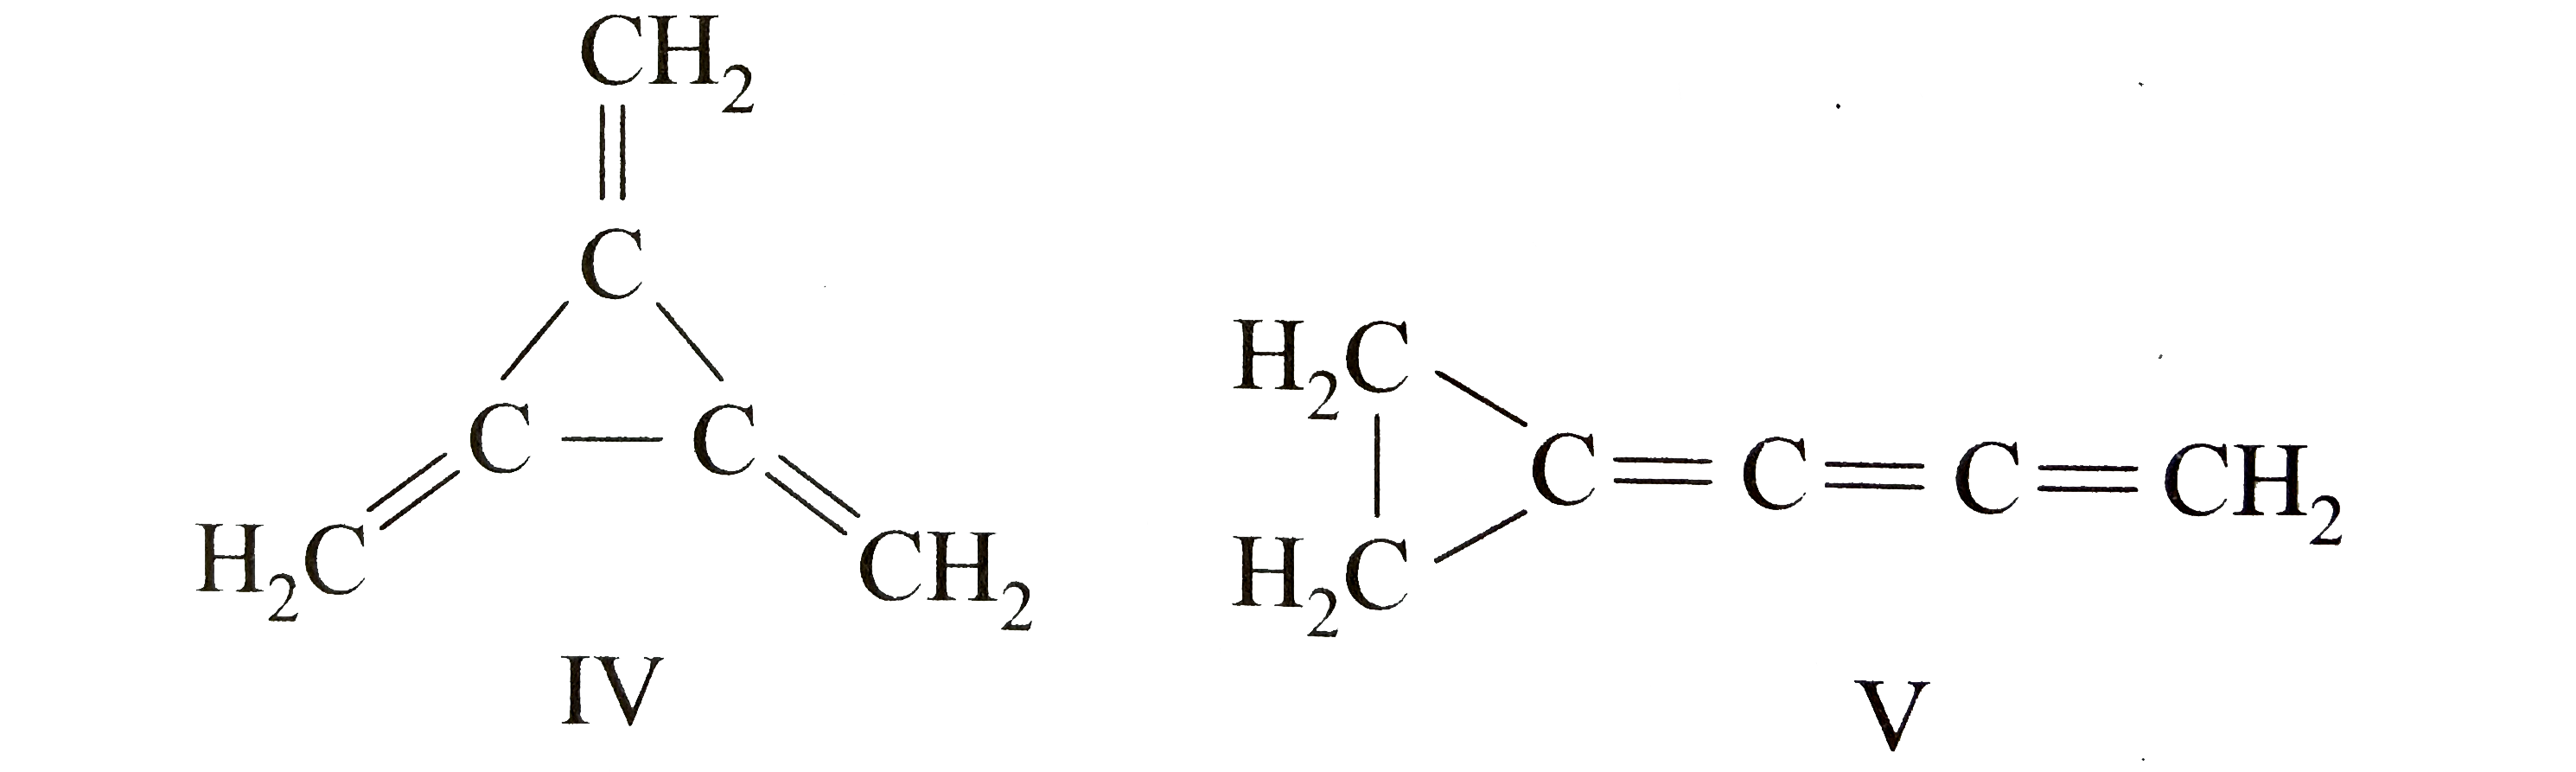 Consider the following structures of formula C(6)H(6)   underset((I))(HC-=C CH(2)CH(2)C-=CH)   underset((II))(HC-=C CH(2)C-=C CH(3))   underset((III))(HC-=C-C-=C-CH(2)CH(3))   Three isomeric monosubstitution products (neglecting streoisomers) are theoretically possible from